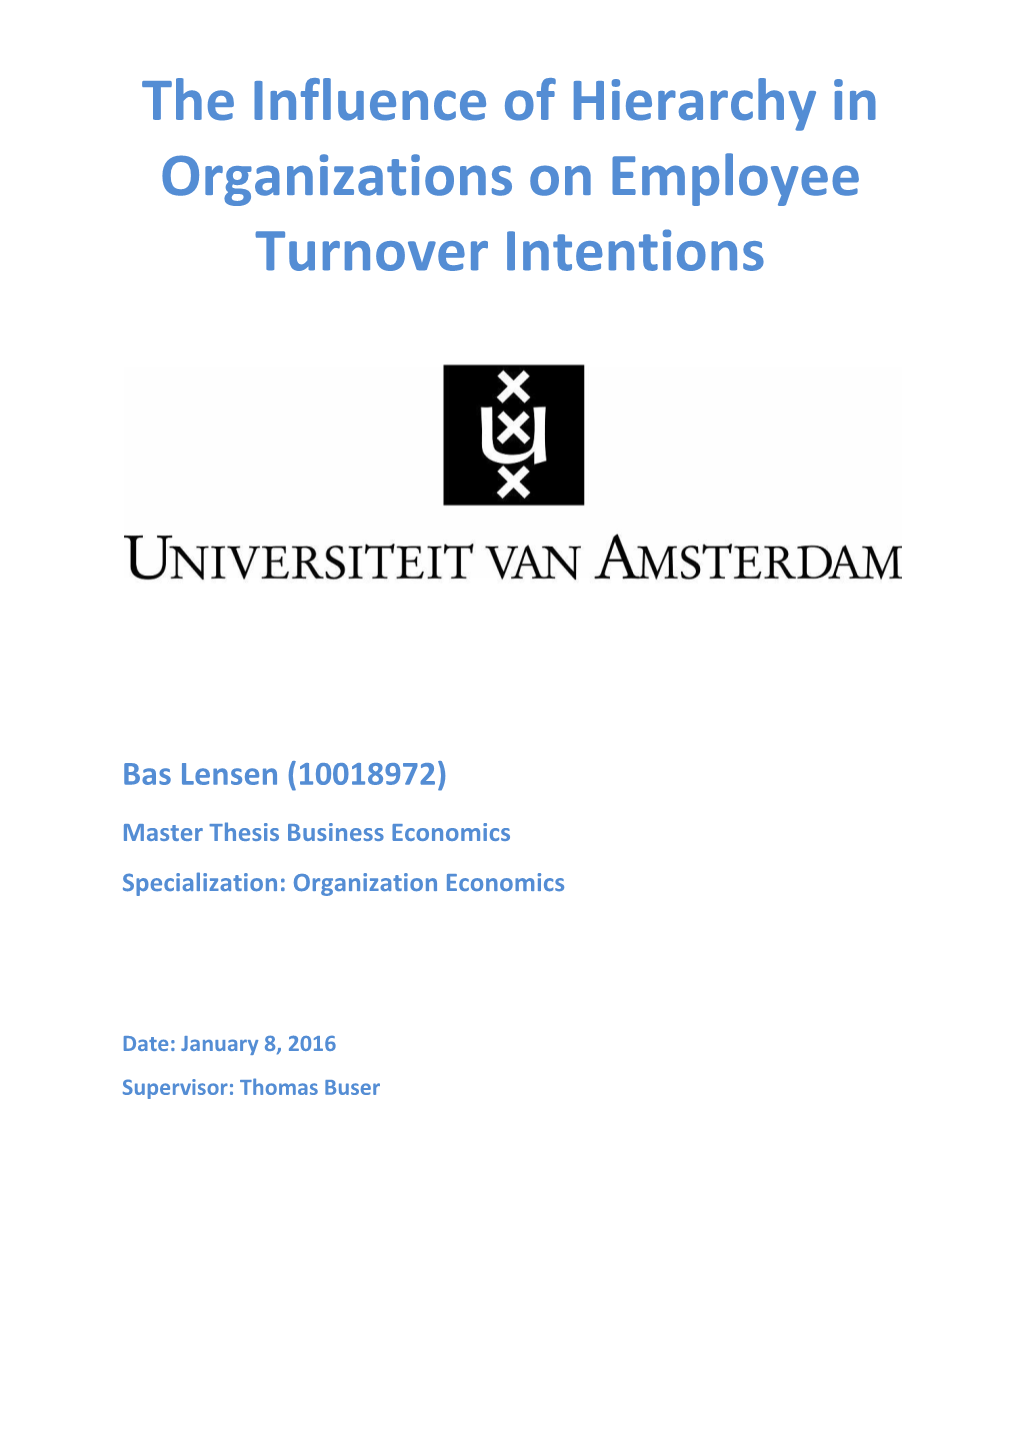 The Influence of Hierarchy in Organizations on Employee Turnover Intentions